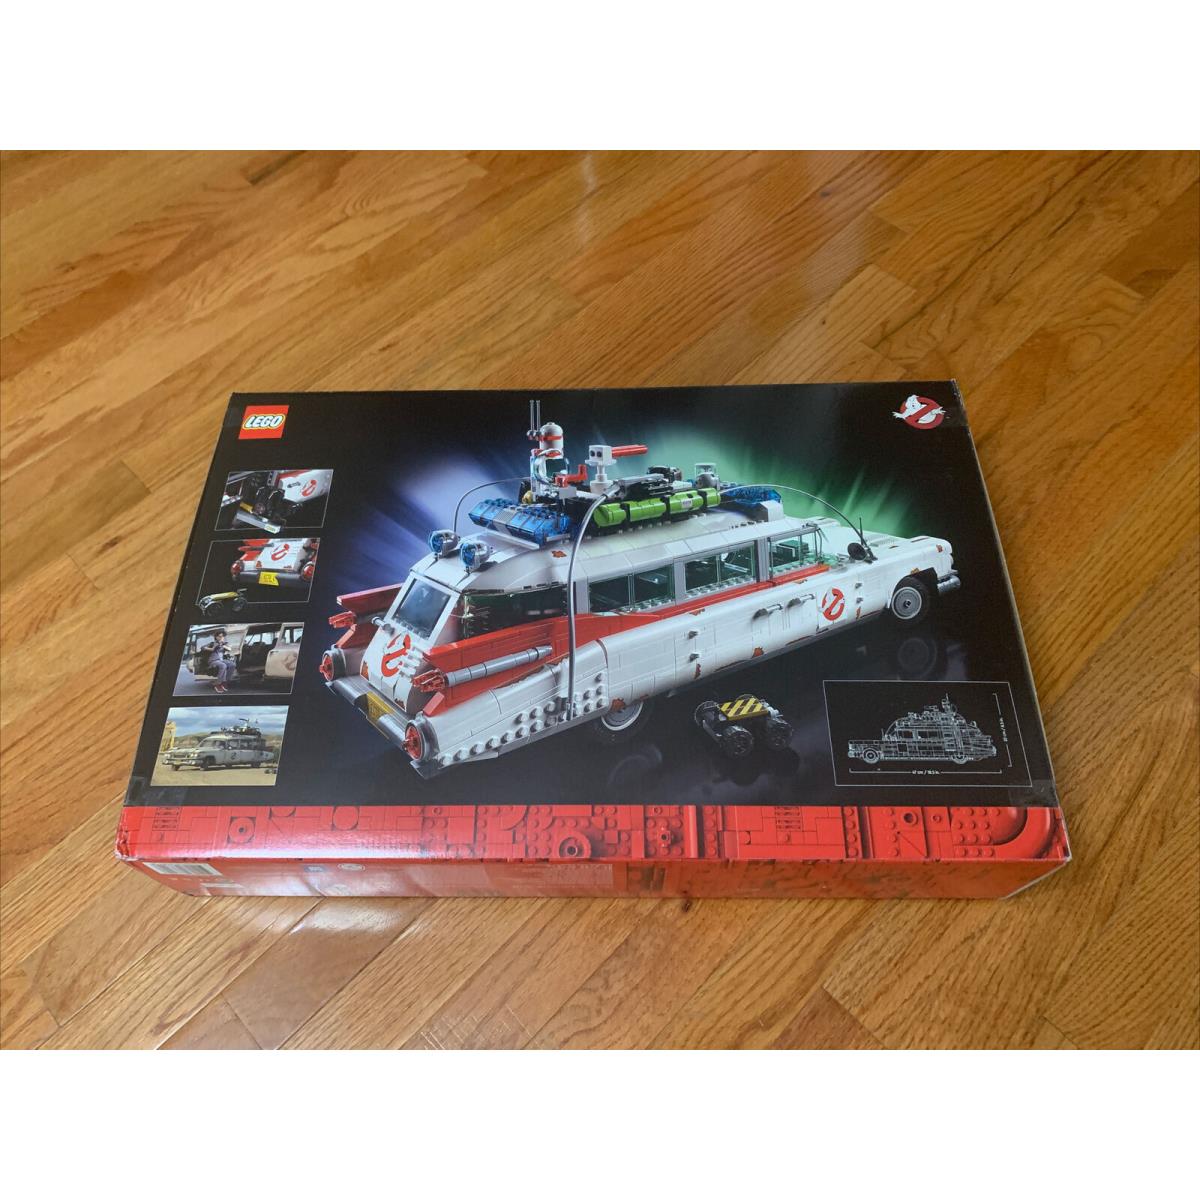 Lego Ghostbusters ECTO-1 Lego 10274 Building Toy